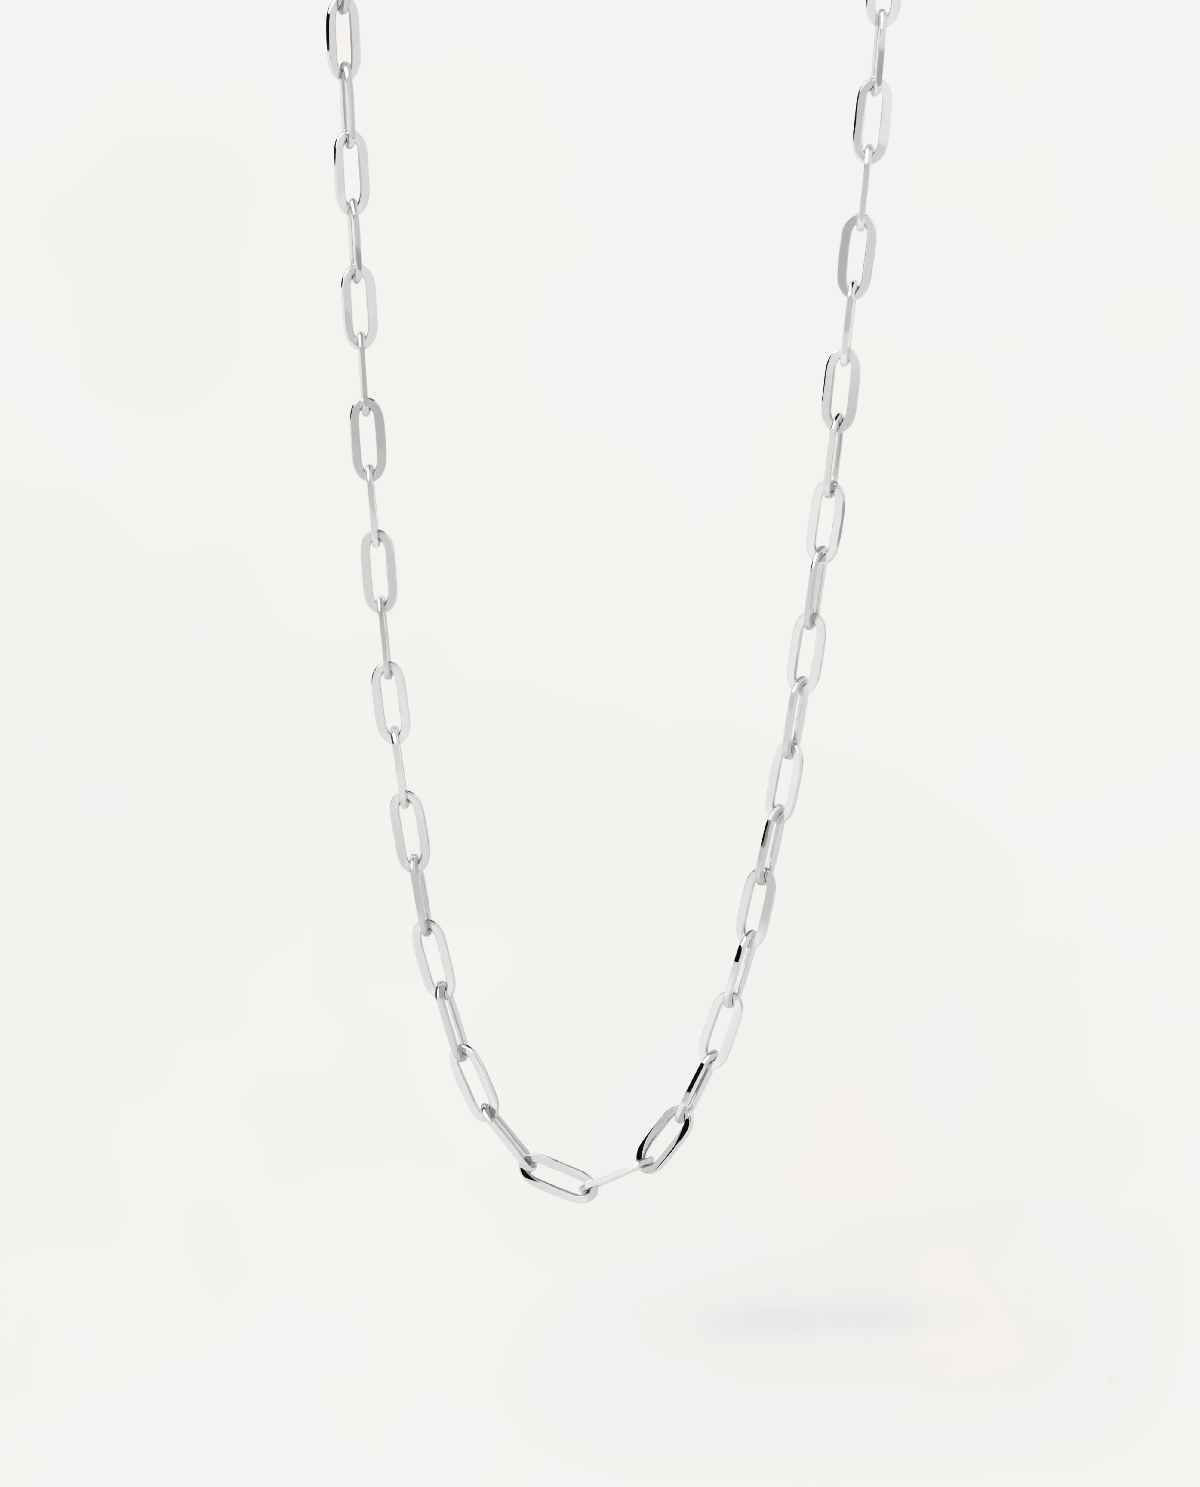 2023 Selection | White Gold Cable Chain Necklace. 18K solid white gold chain necklace with cable links. Get the latest arrival from PDPAOLA. Place your order safely and get this Best Seller. Free Shipping.